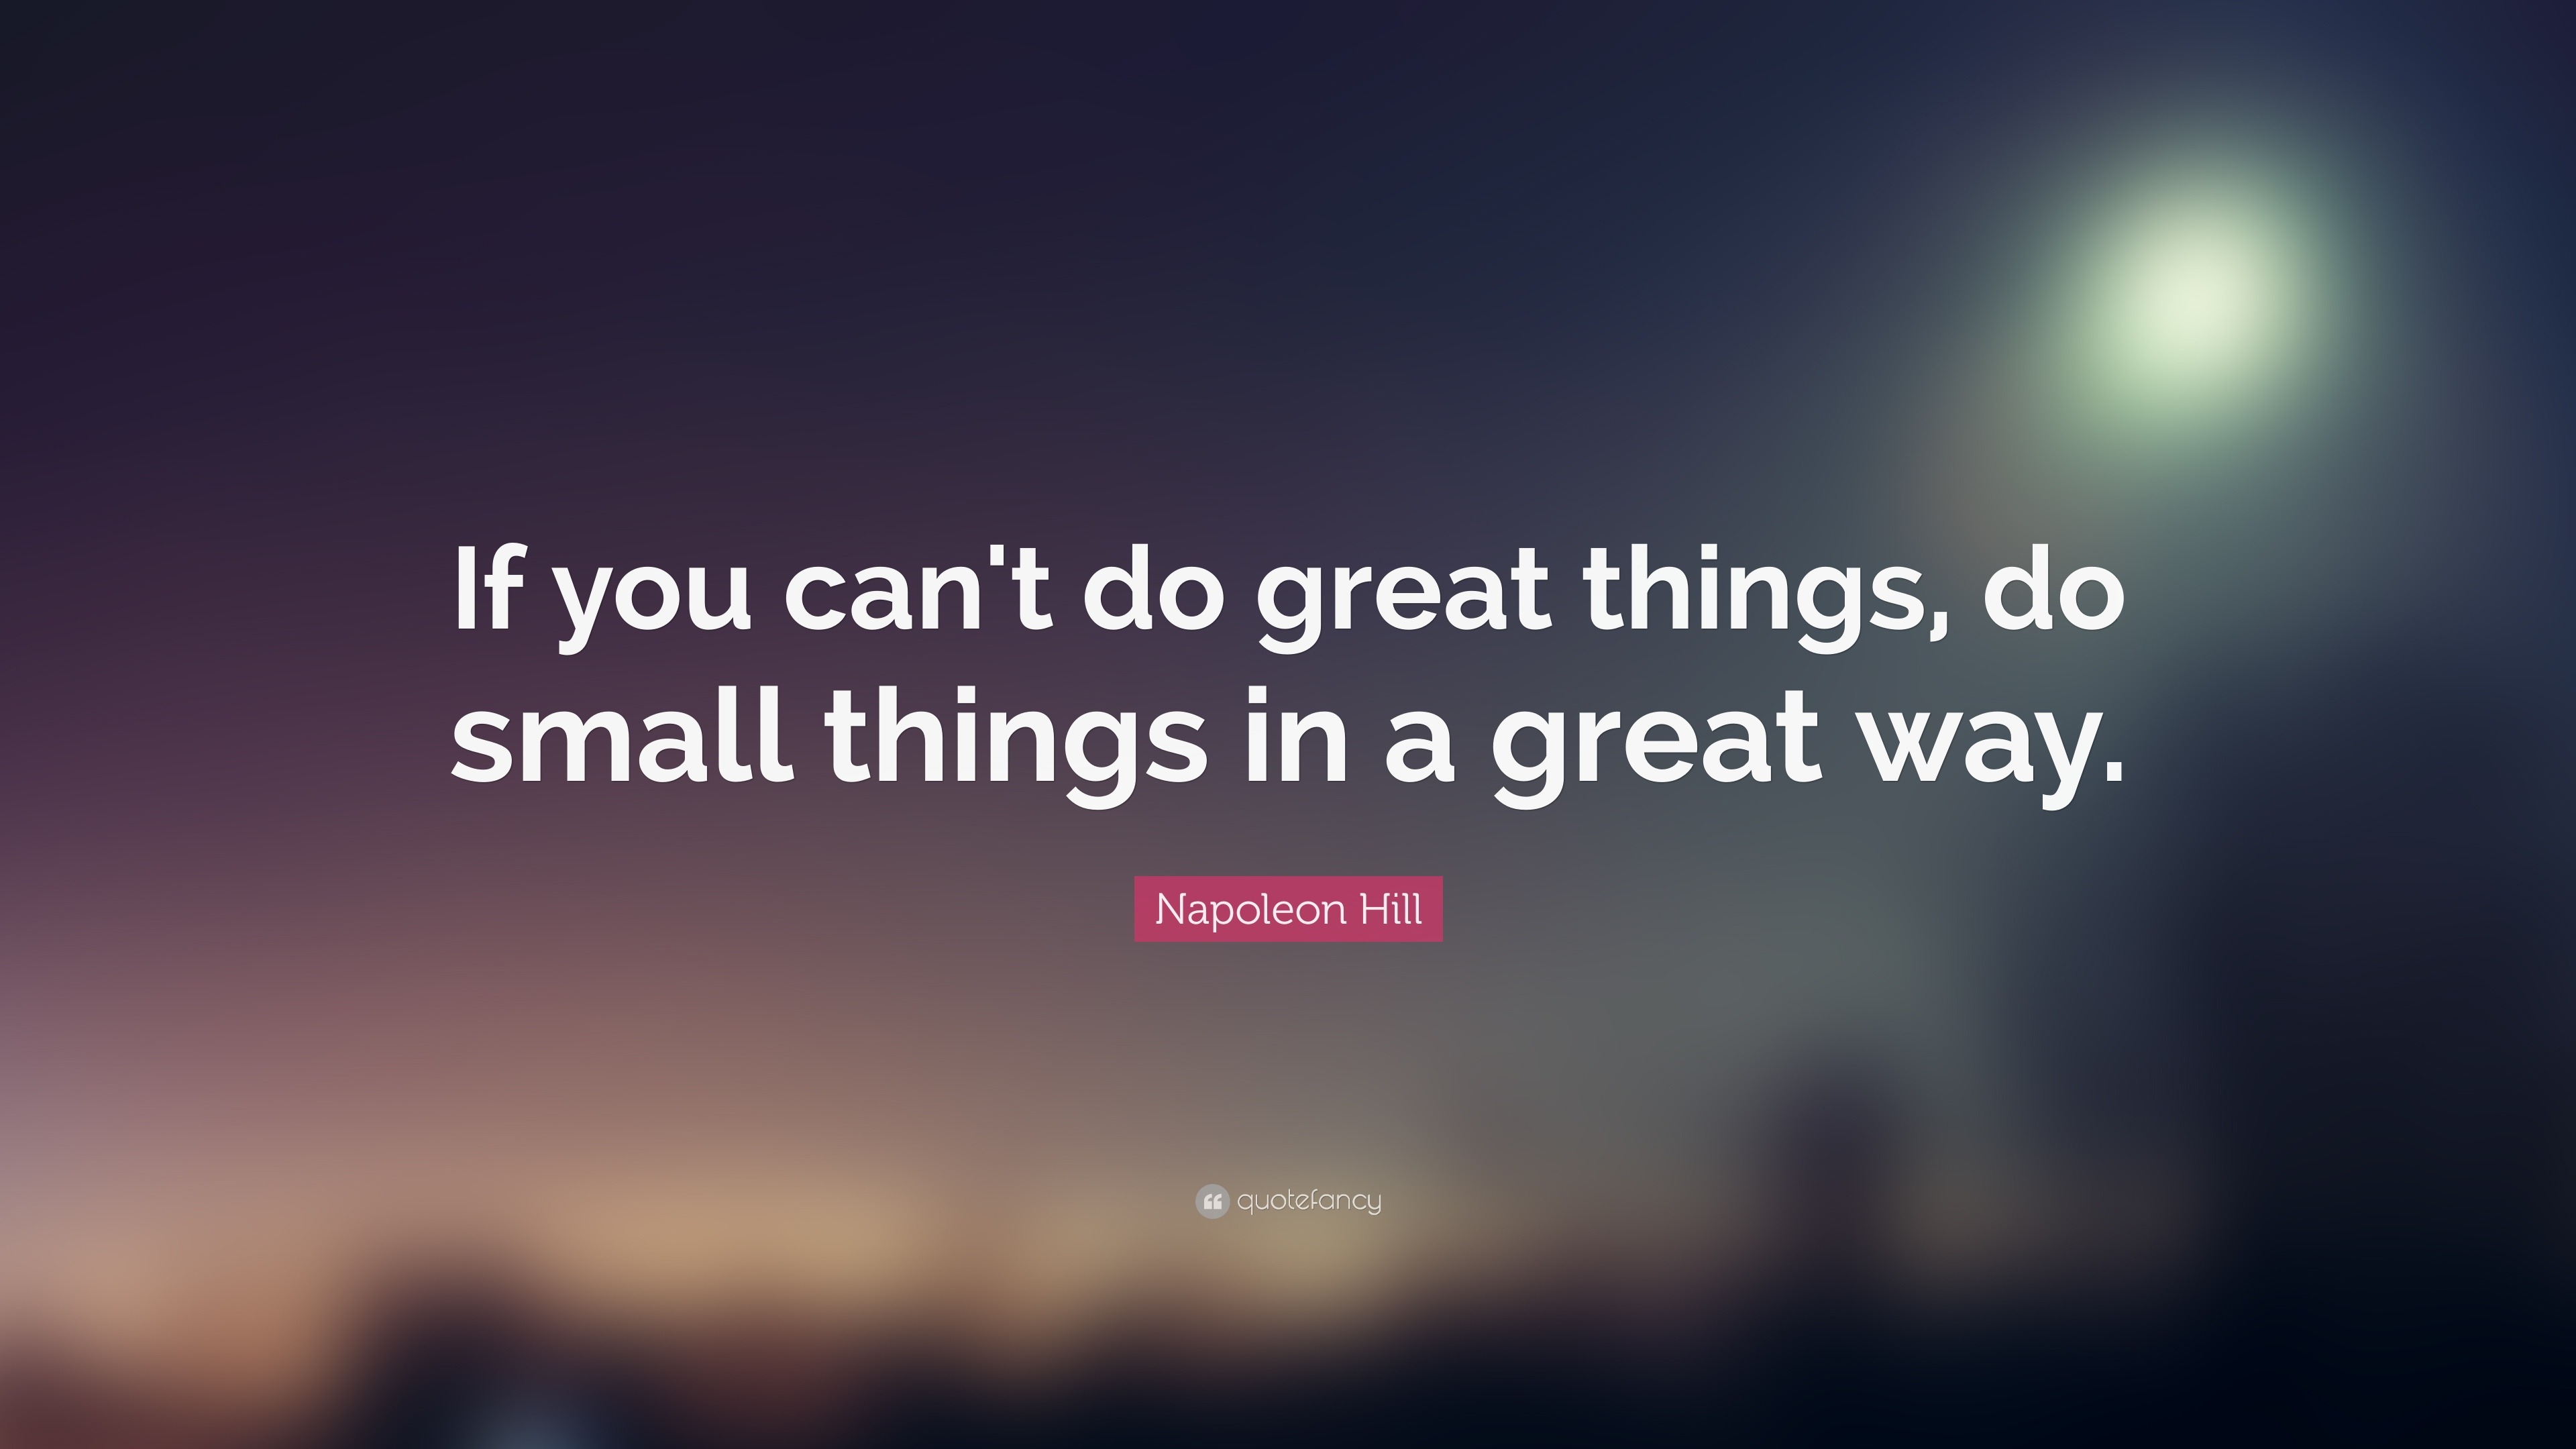 Napoleon Hill Quote: “If you can't do great things, do small things in ...